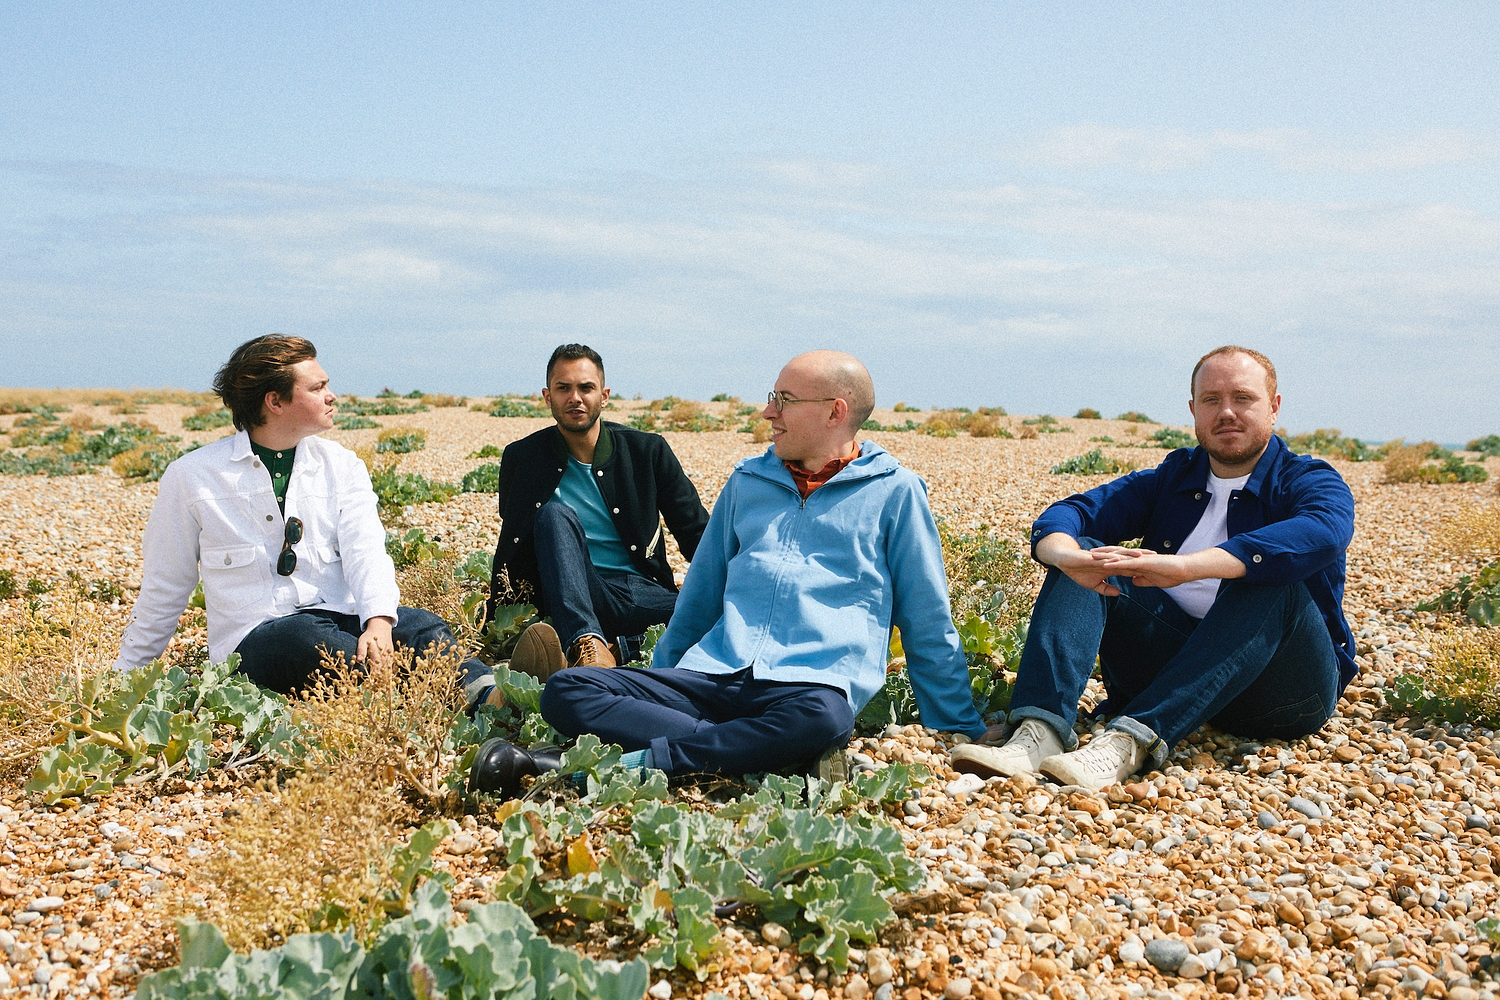 Bombay Bicycle Club cover The Grateful Dead’s ‘Terrapin Station’